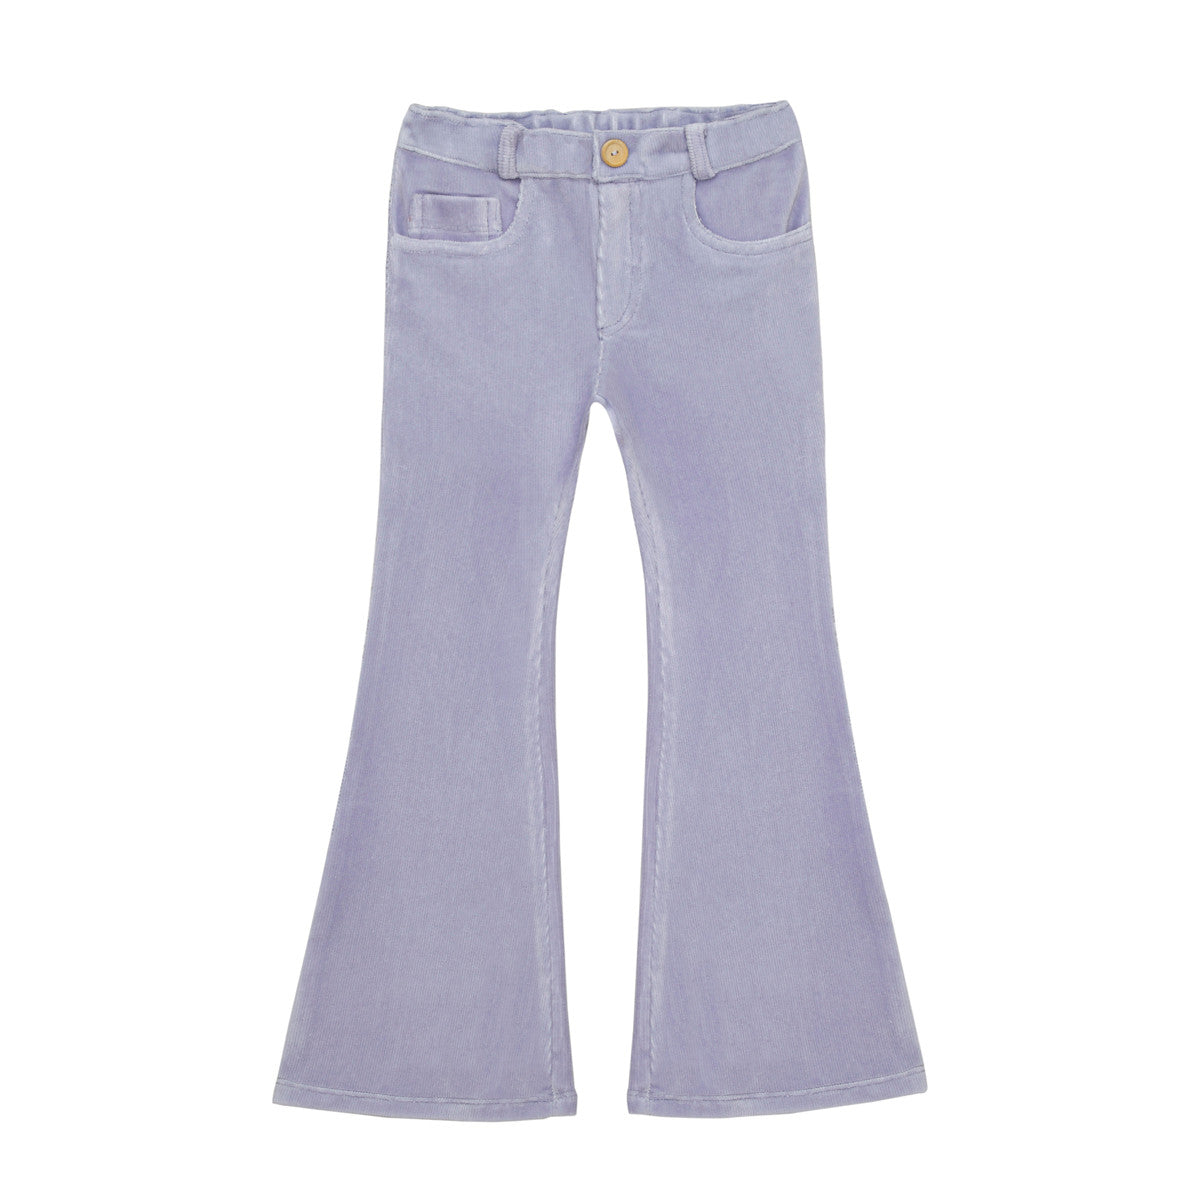 Little Hedonist 5-pocket flared pants in Lavender Frost, slim fit thighs, for boys and girls. Made from the softest organic fabric. Sustainable unisex kids clothing.